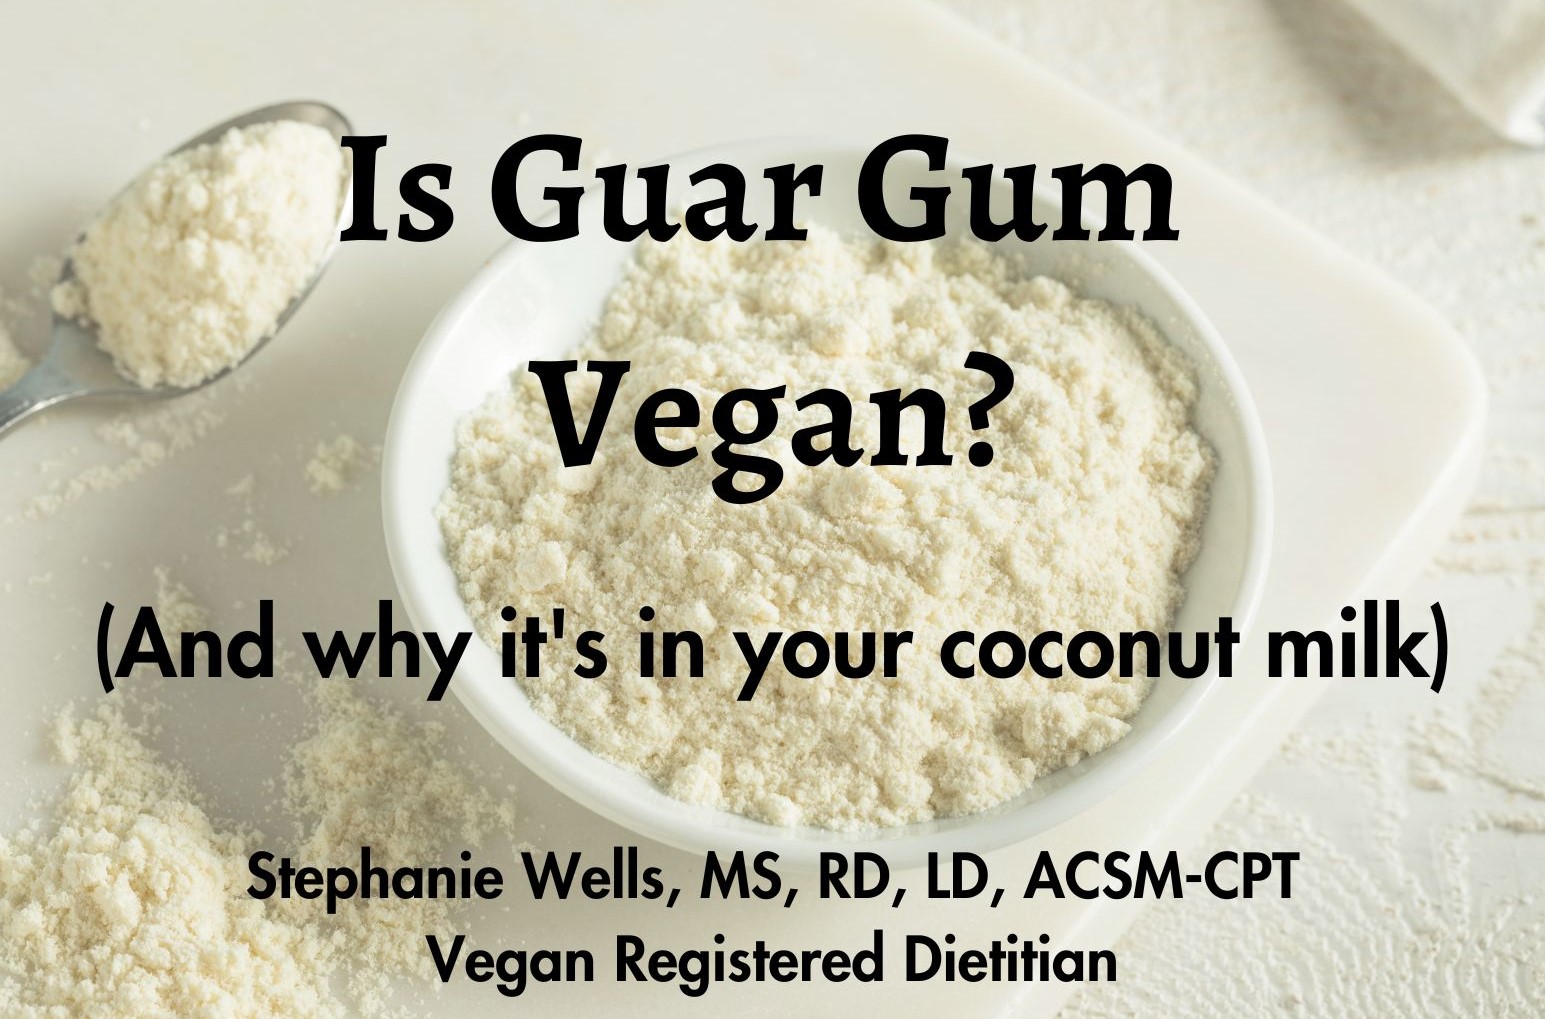 Photo of guar gum powder with black text on top reading "is guar gum vegan and why it's in your coconut milk"